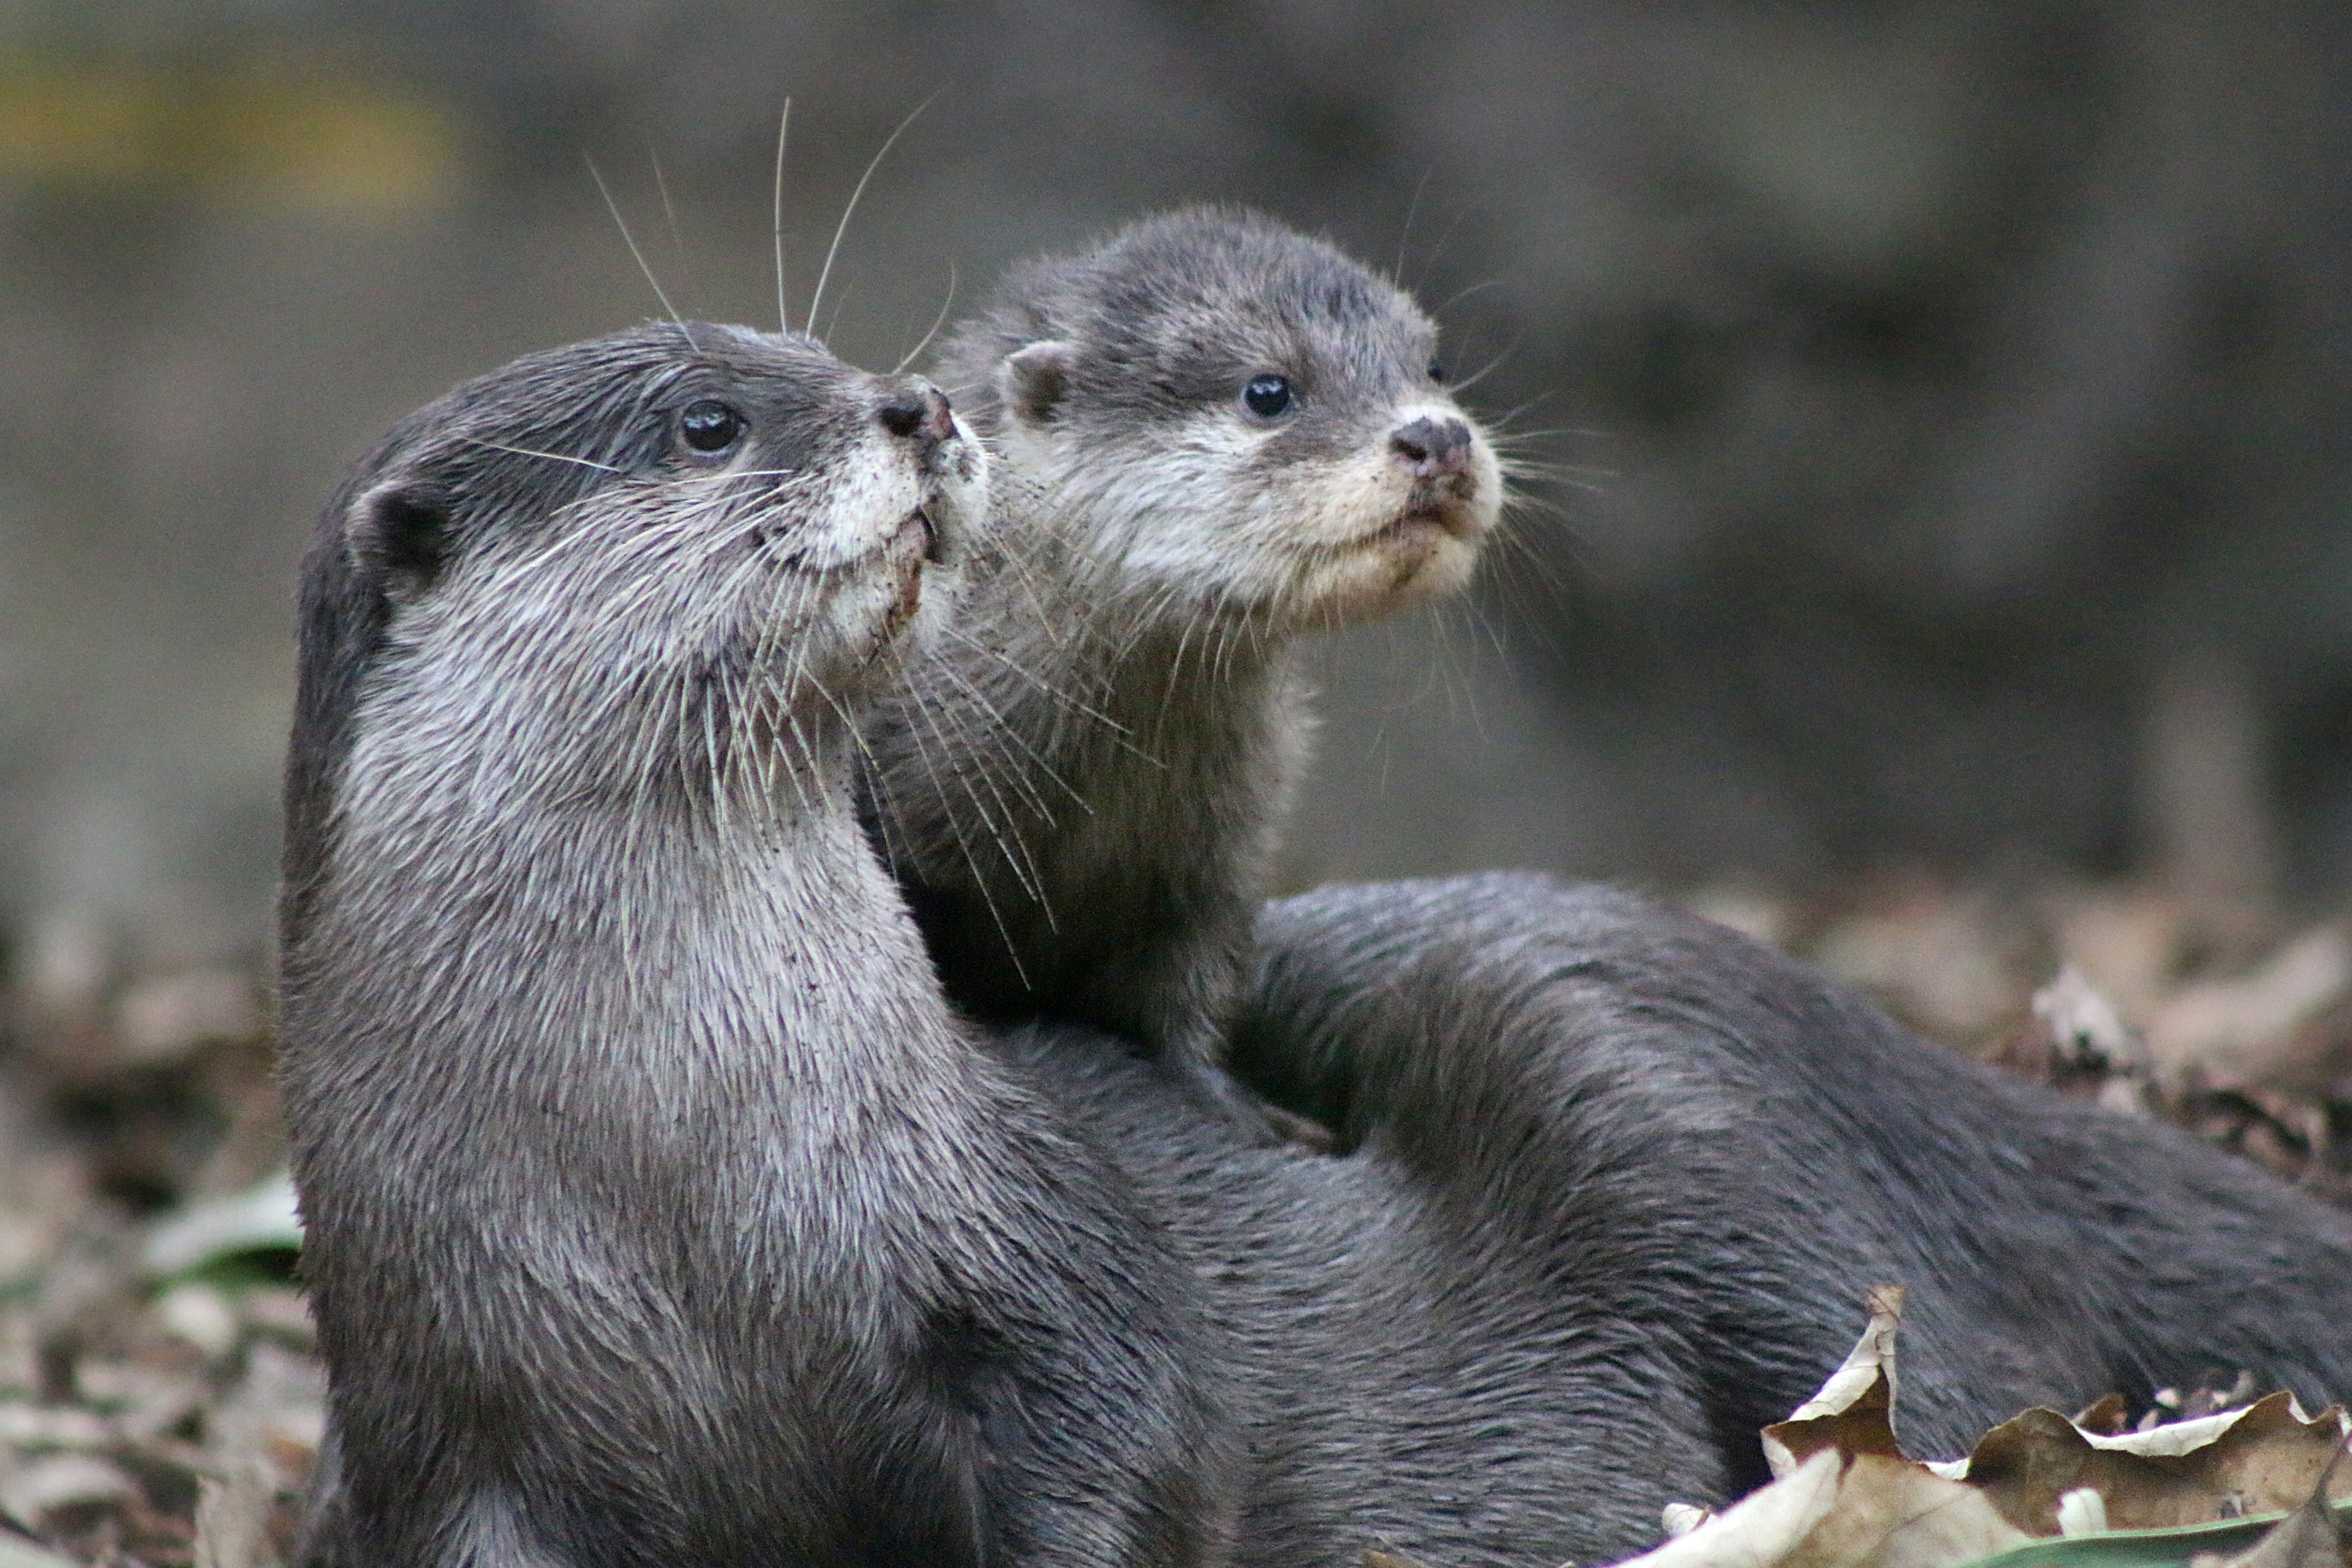 Otter history and some interesting facts